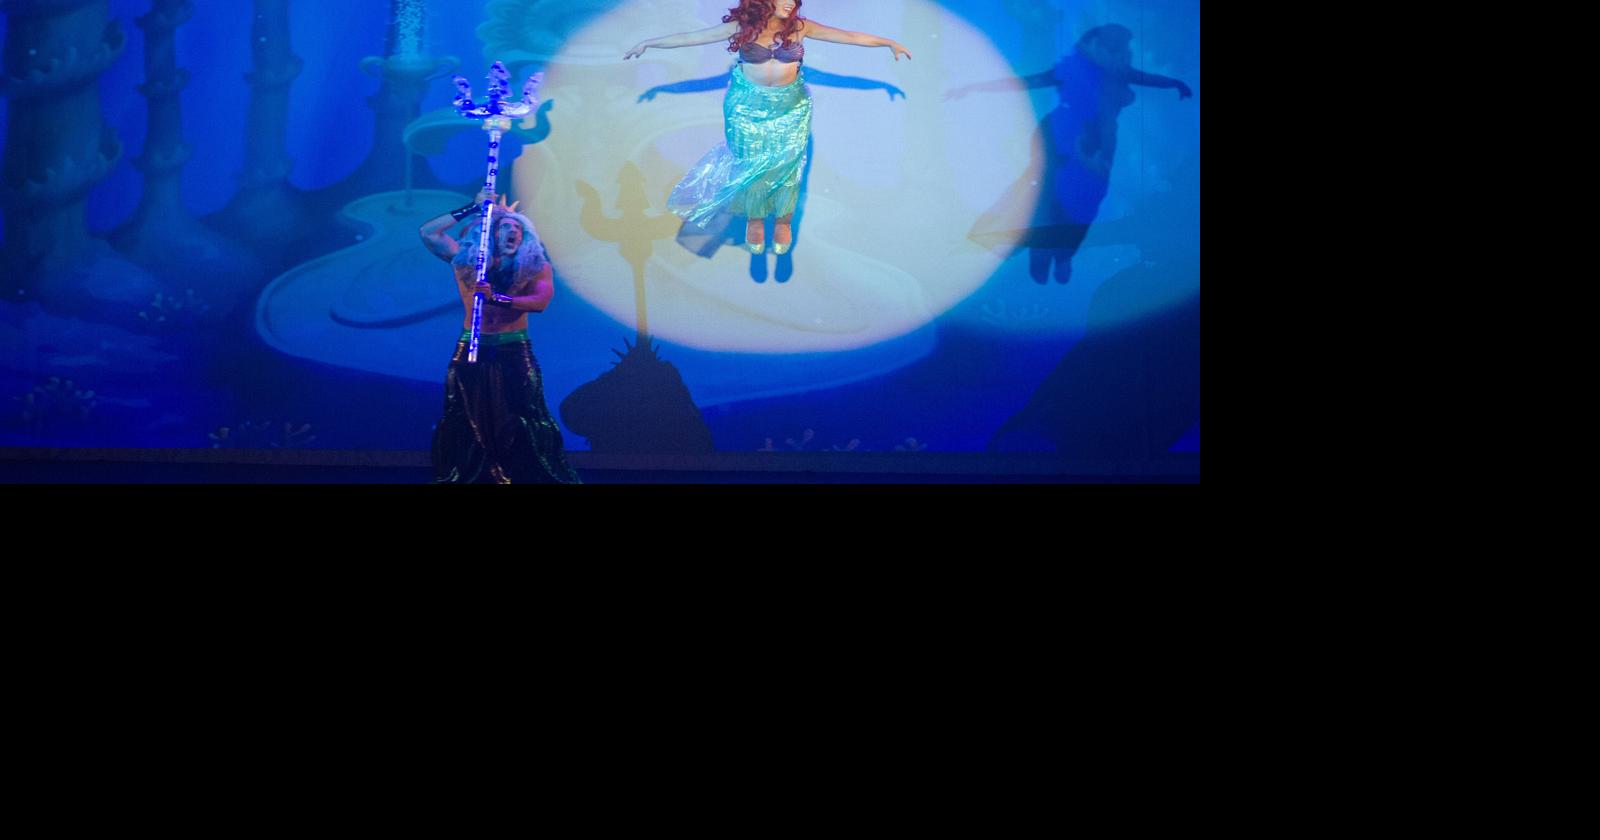 The Little Mermaid is a superb production